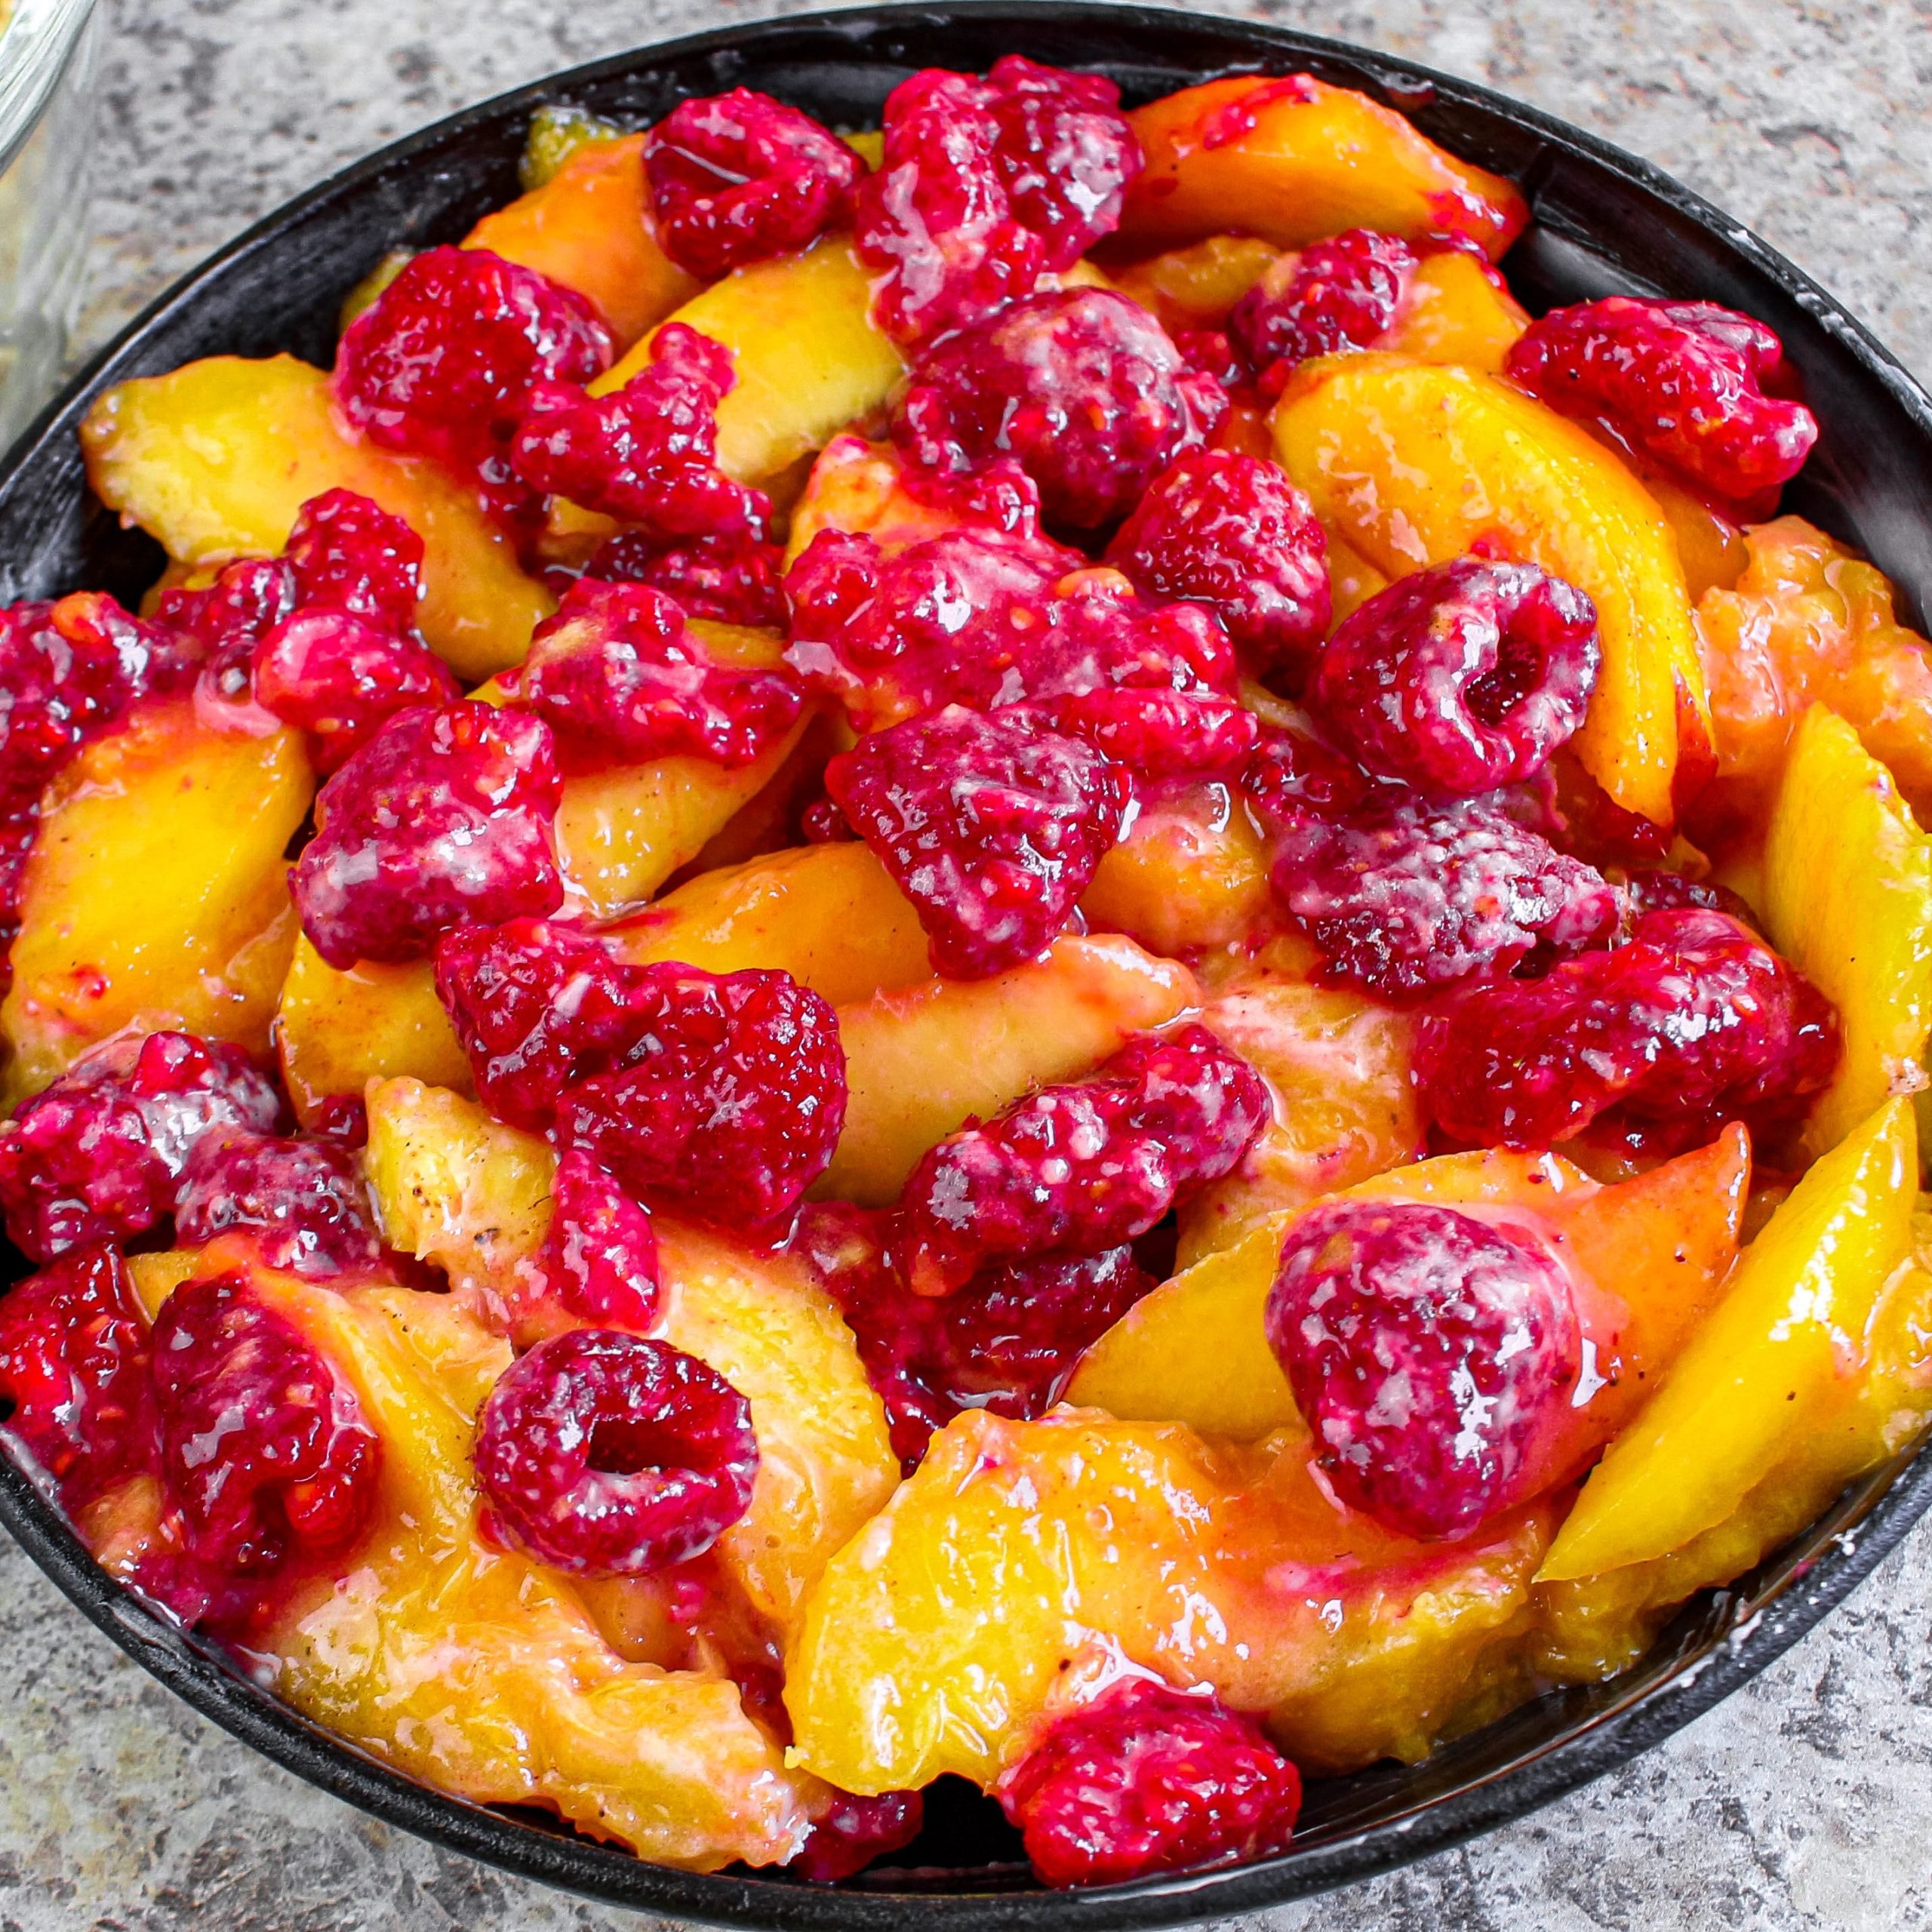 Bake for 25-28 minutes or until the fruit is bubbly and the oatmeal crisp is golden brown. Remove from oven.